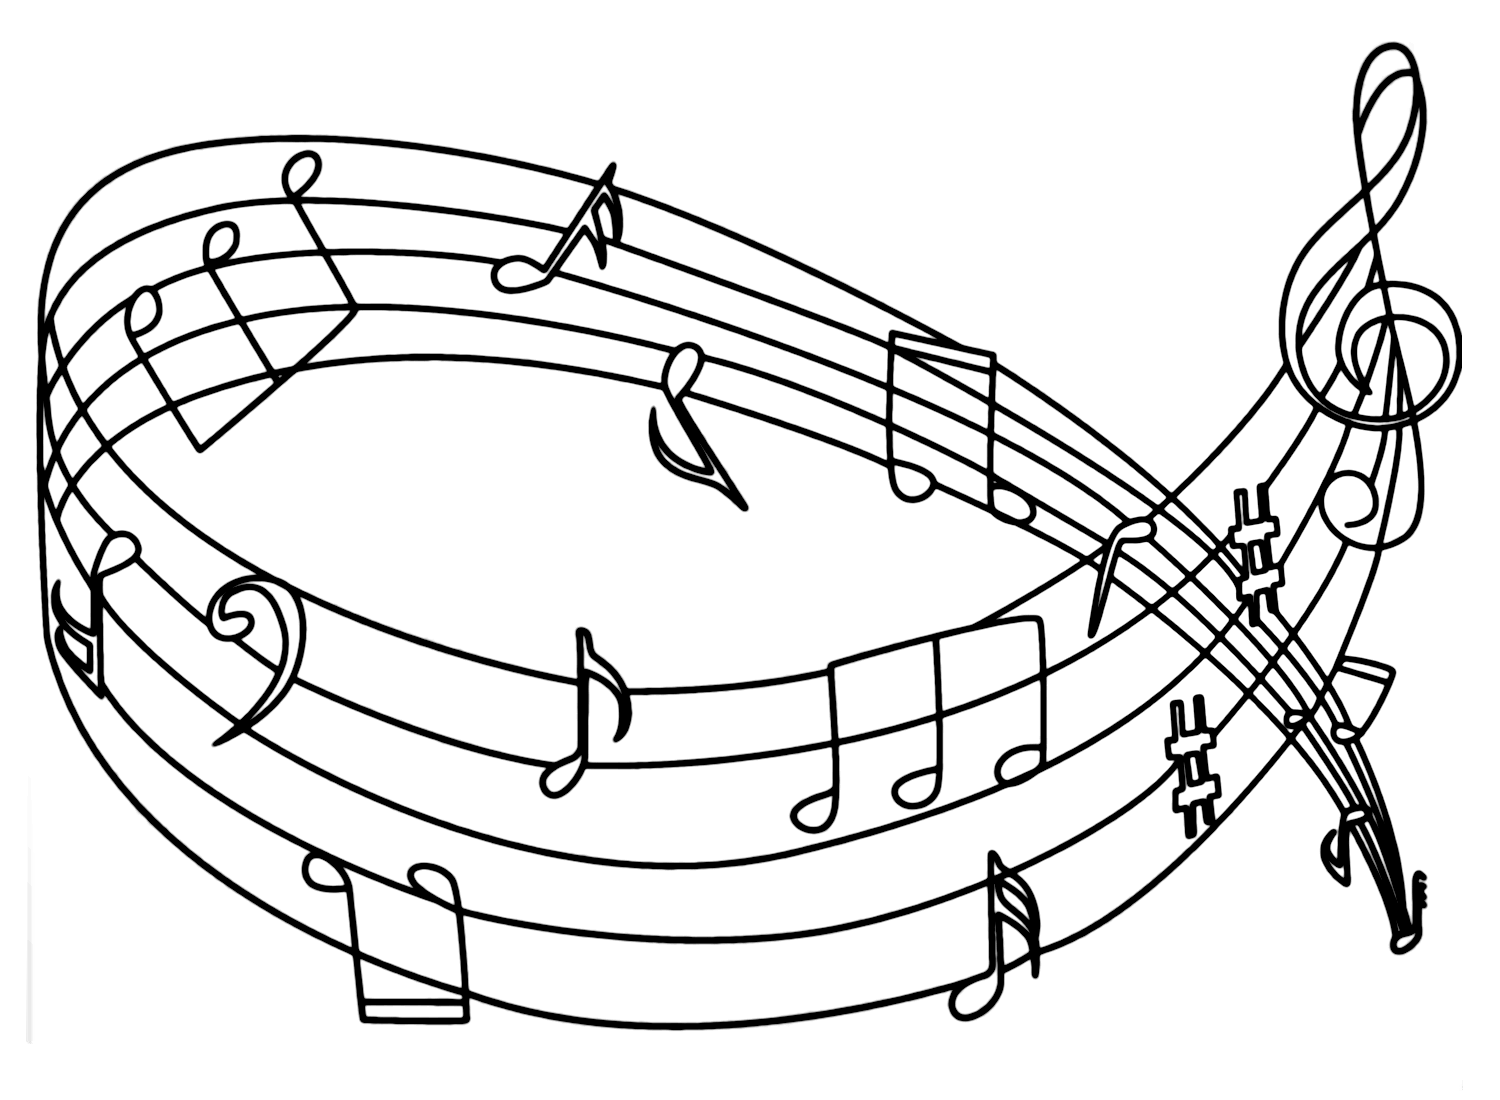 Music Notes Coloring Pages - Coloring Pages For Kids And Adults